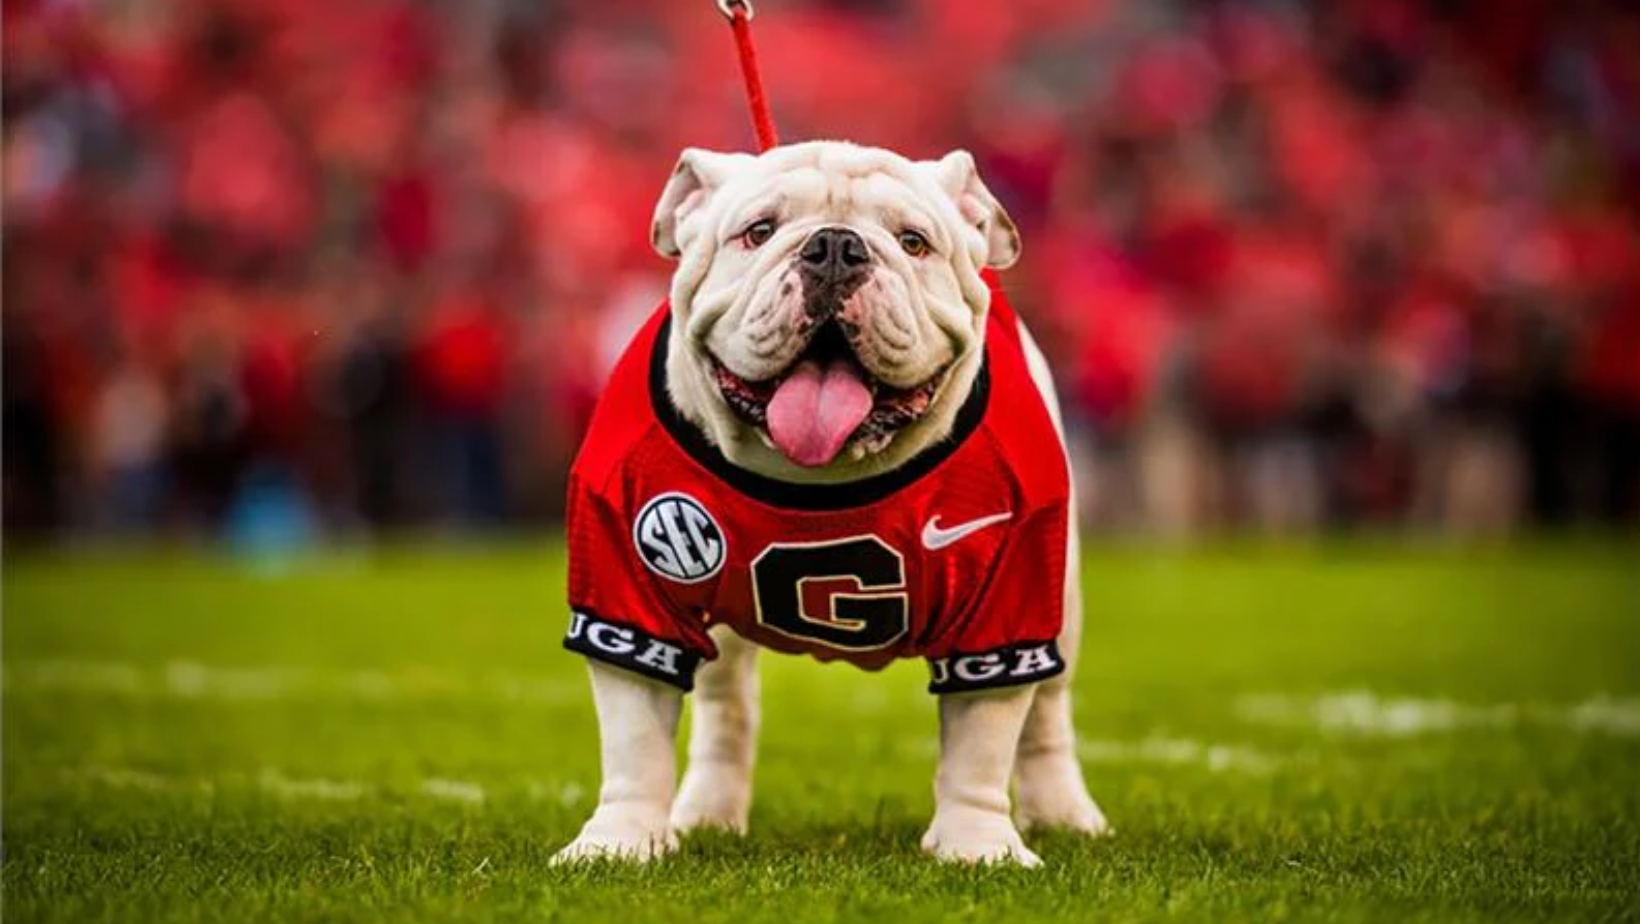 UGA: A Sweeping Campus and Wide Range of Majors